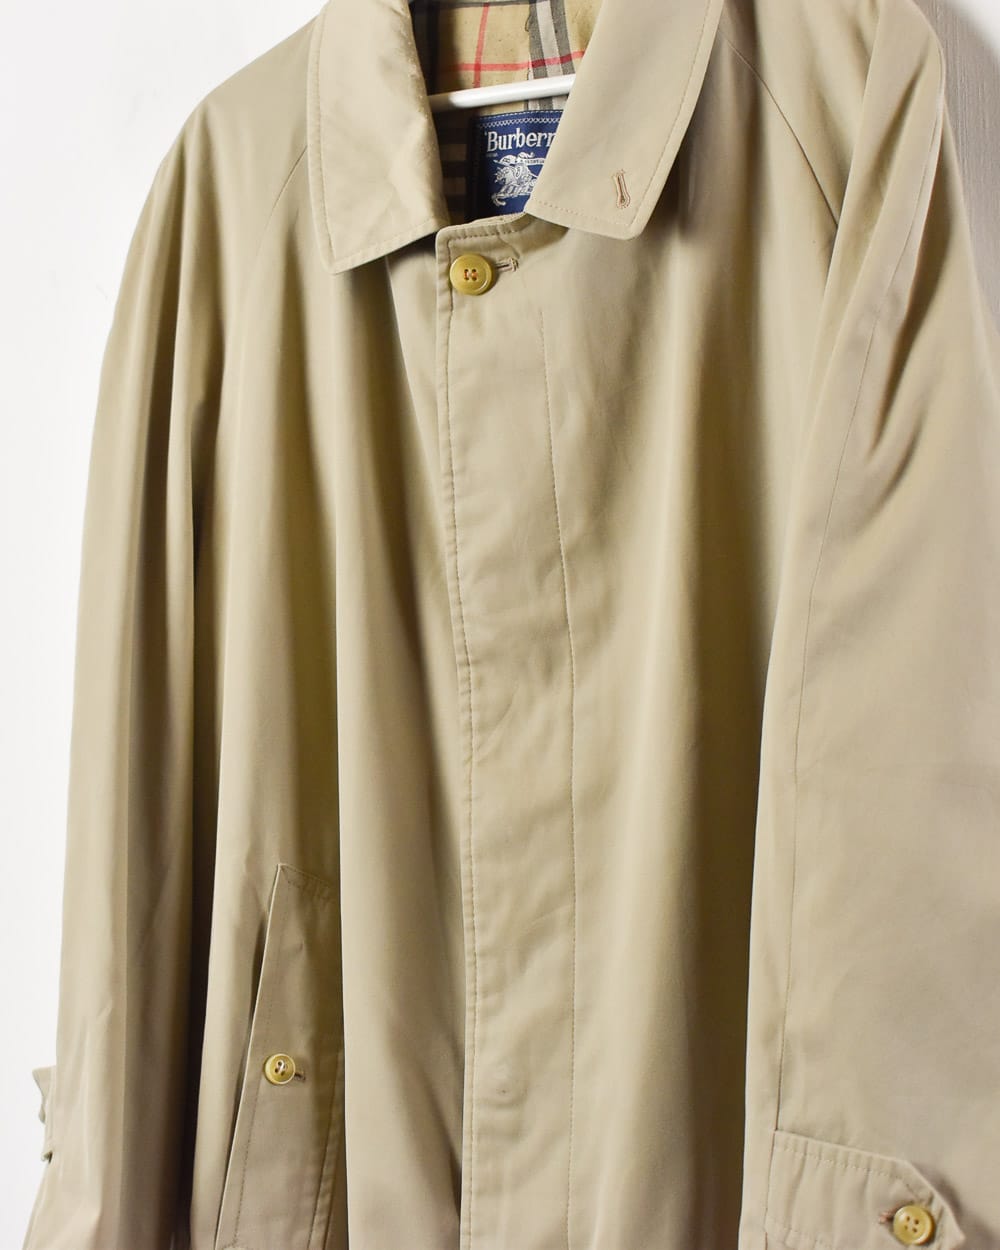 Neutral Burberry Trench Coat - Large Women's